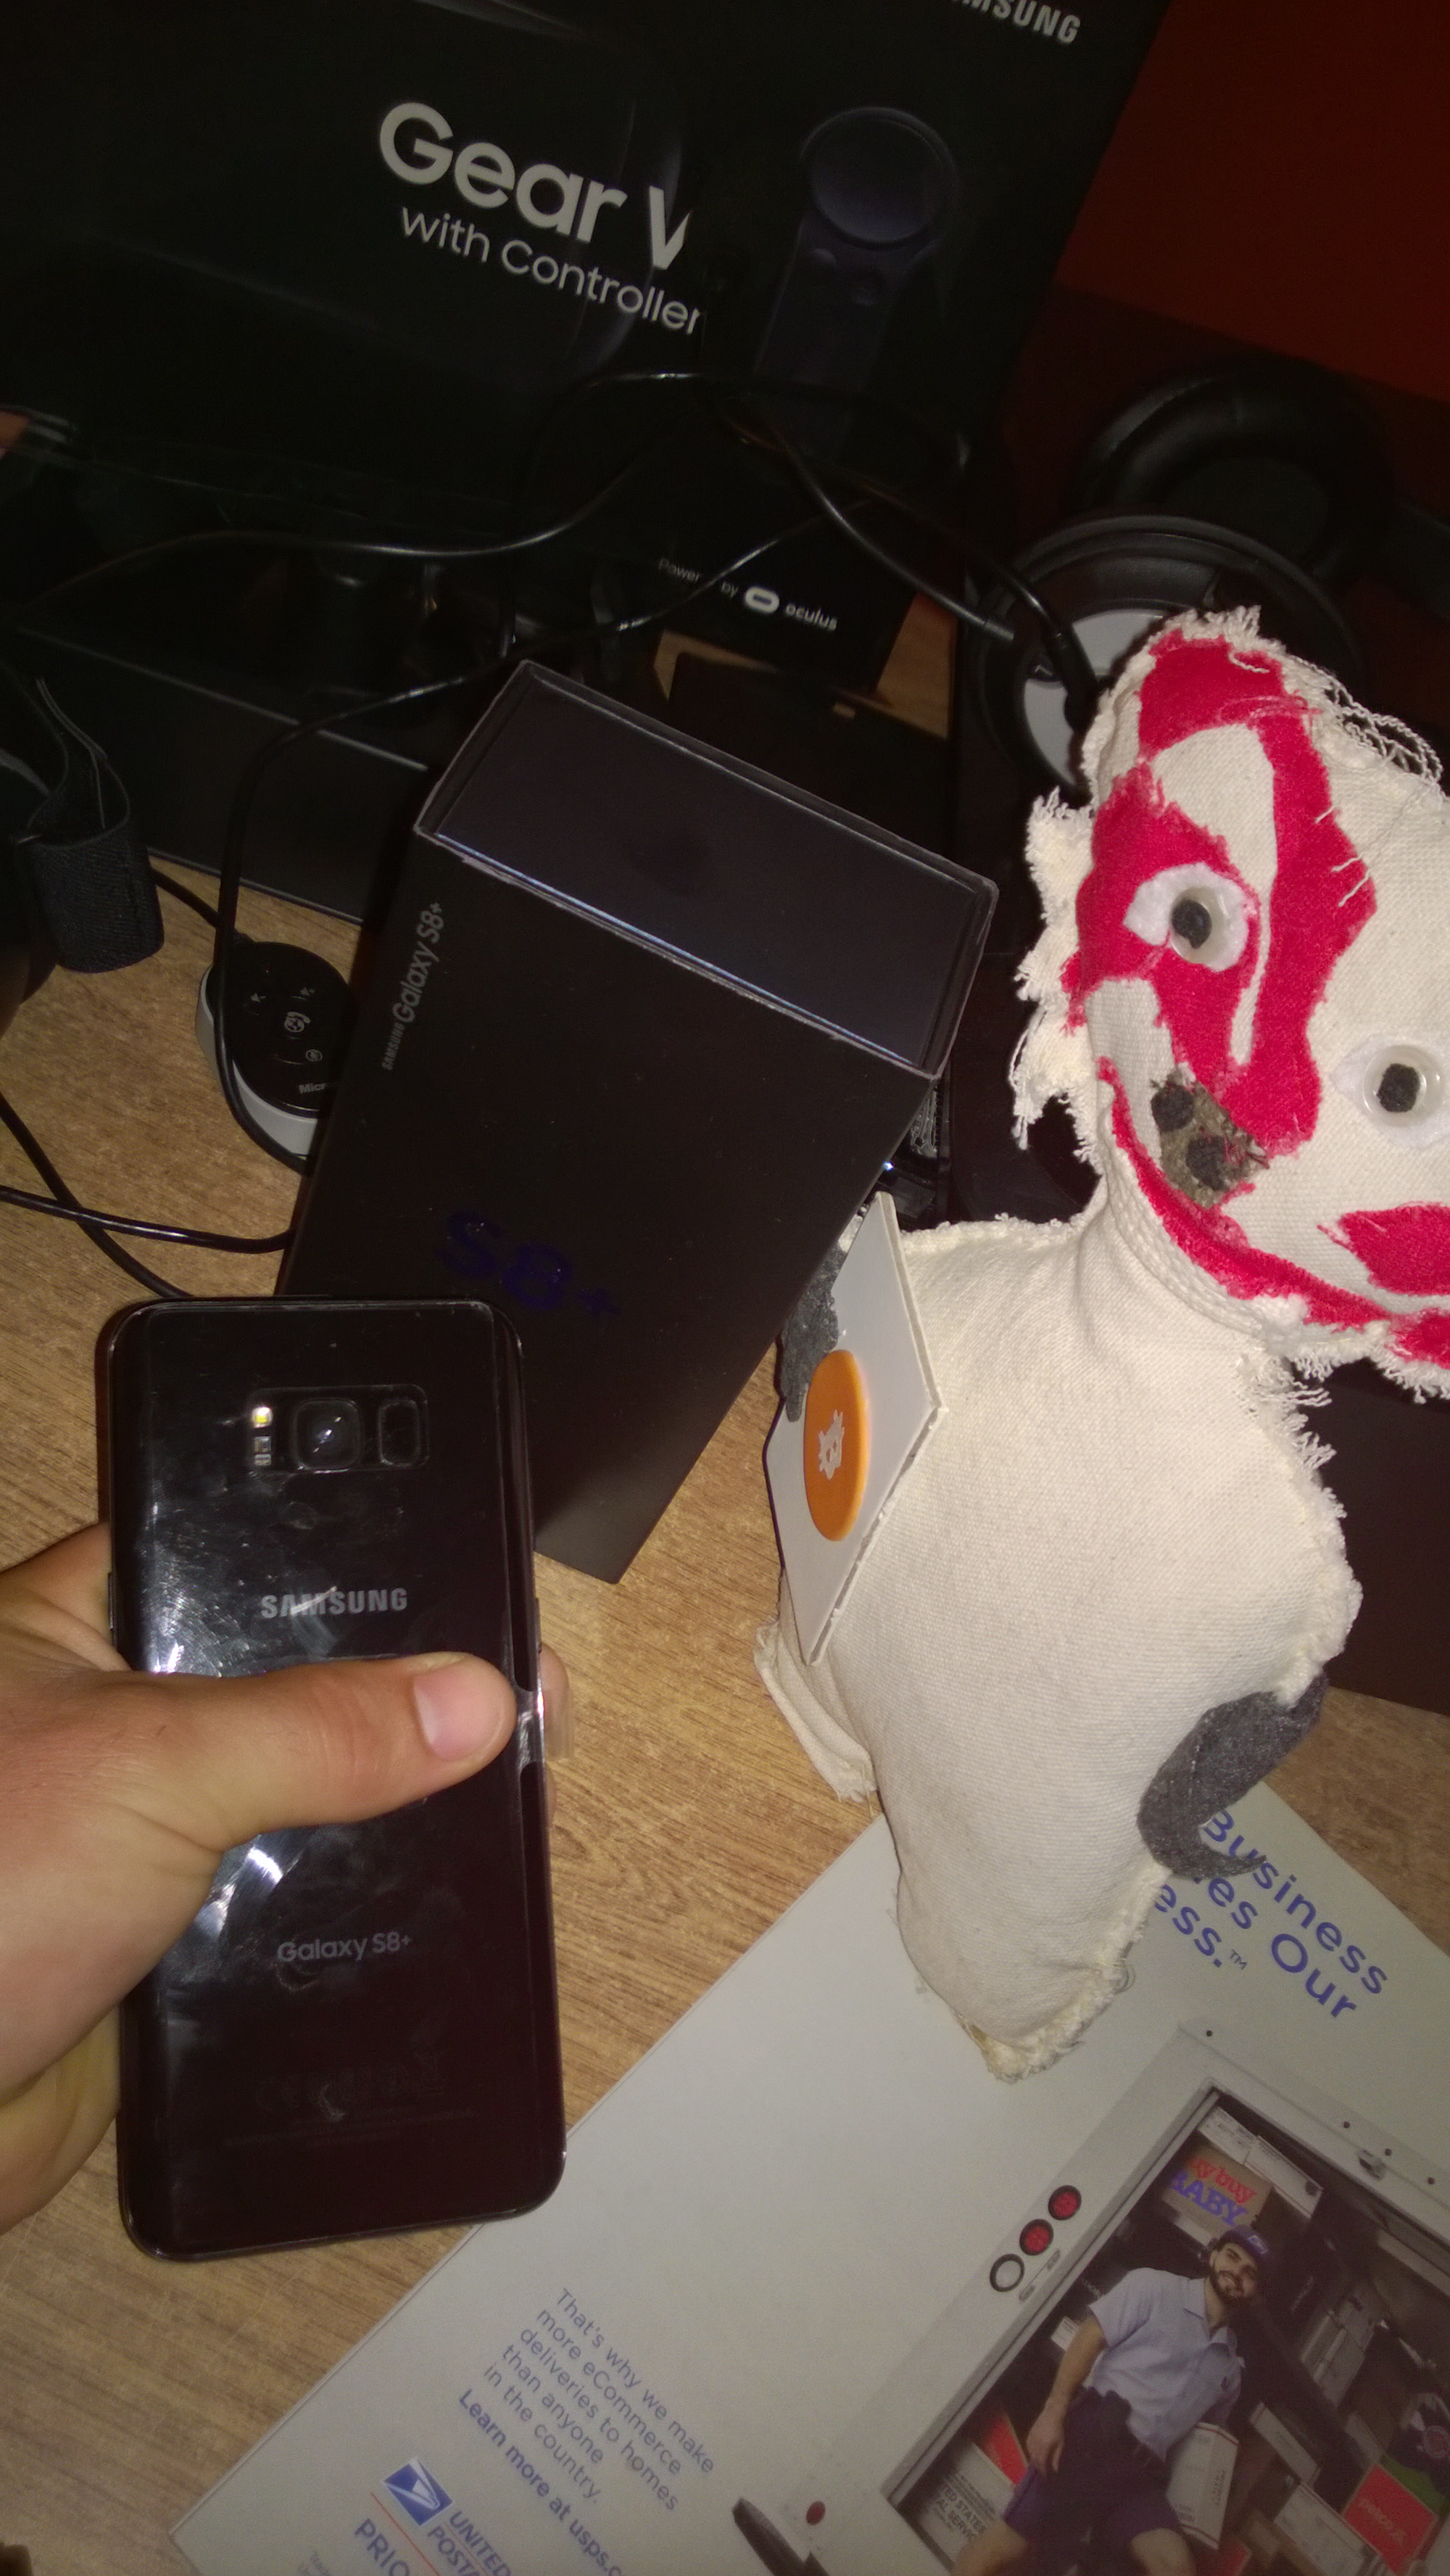 Nandi Bear and his new Samsung Galaxy s8 PLUS US unlocked and Gear VR virtual reality headset with controller Nandibear